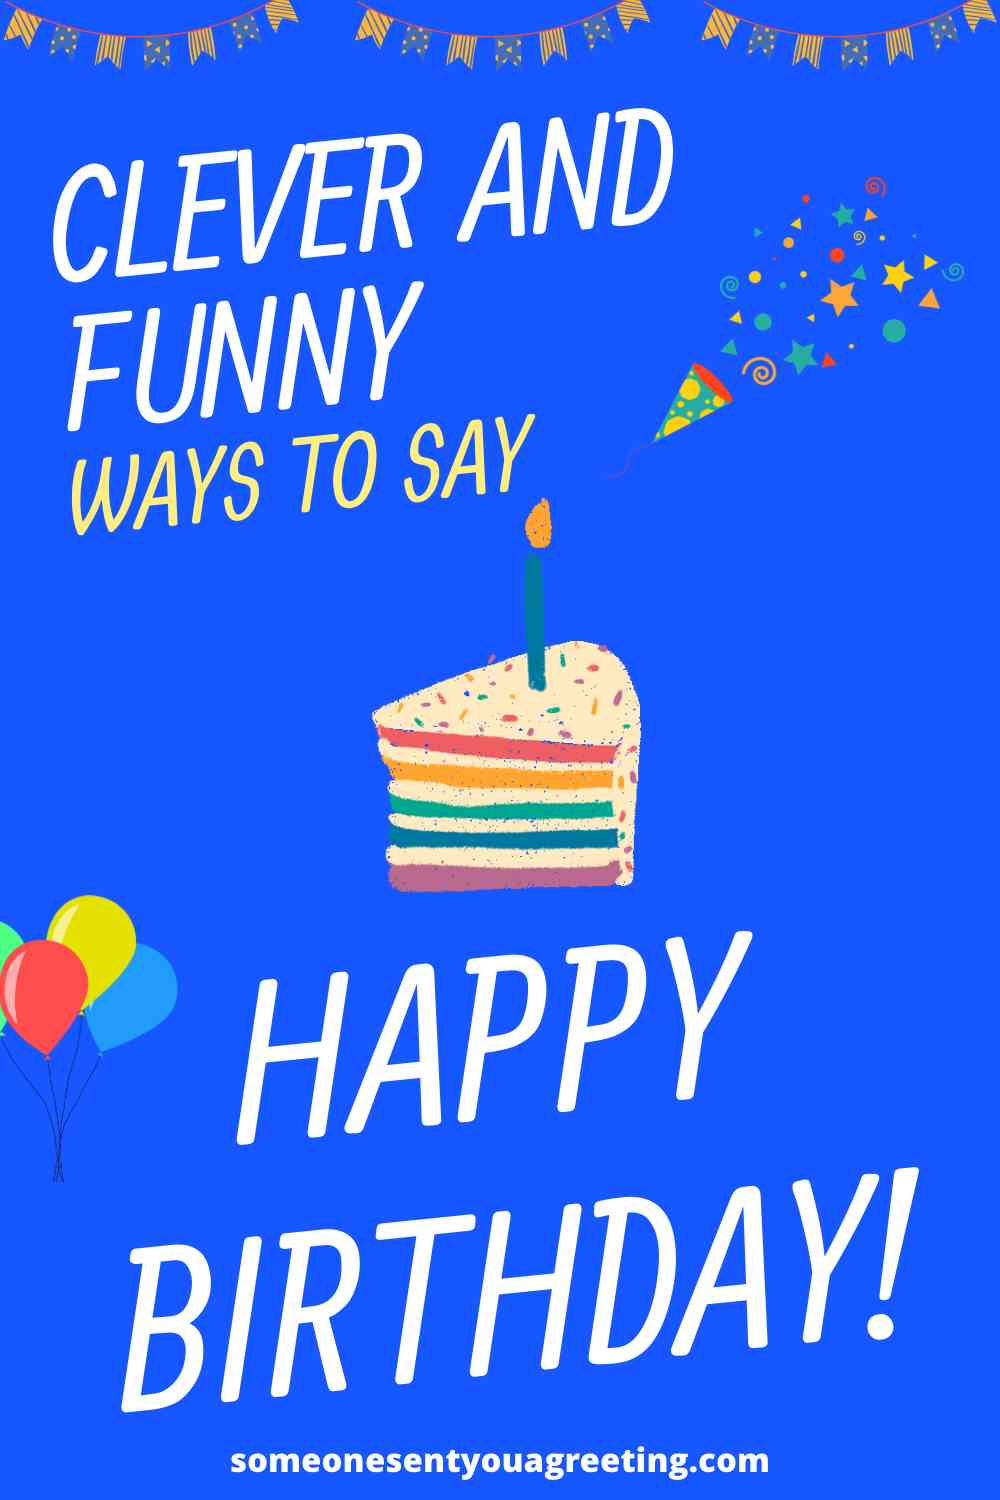 45 Clever and Funny Ways to Say Happy Birthday